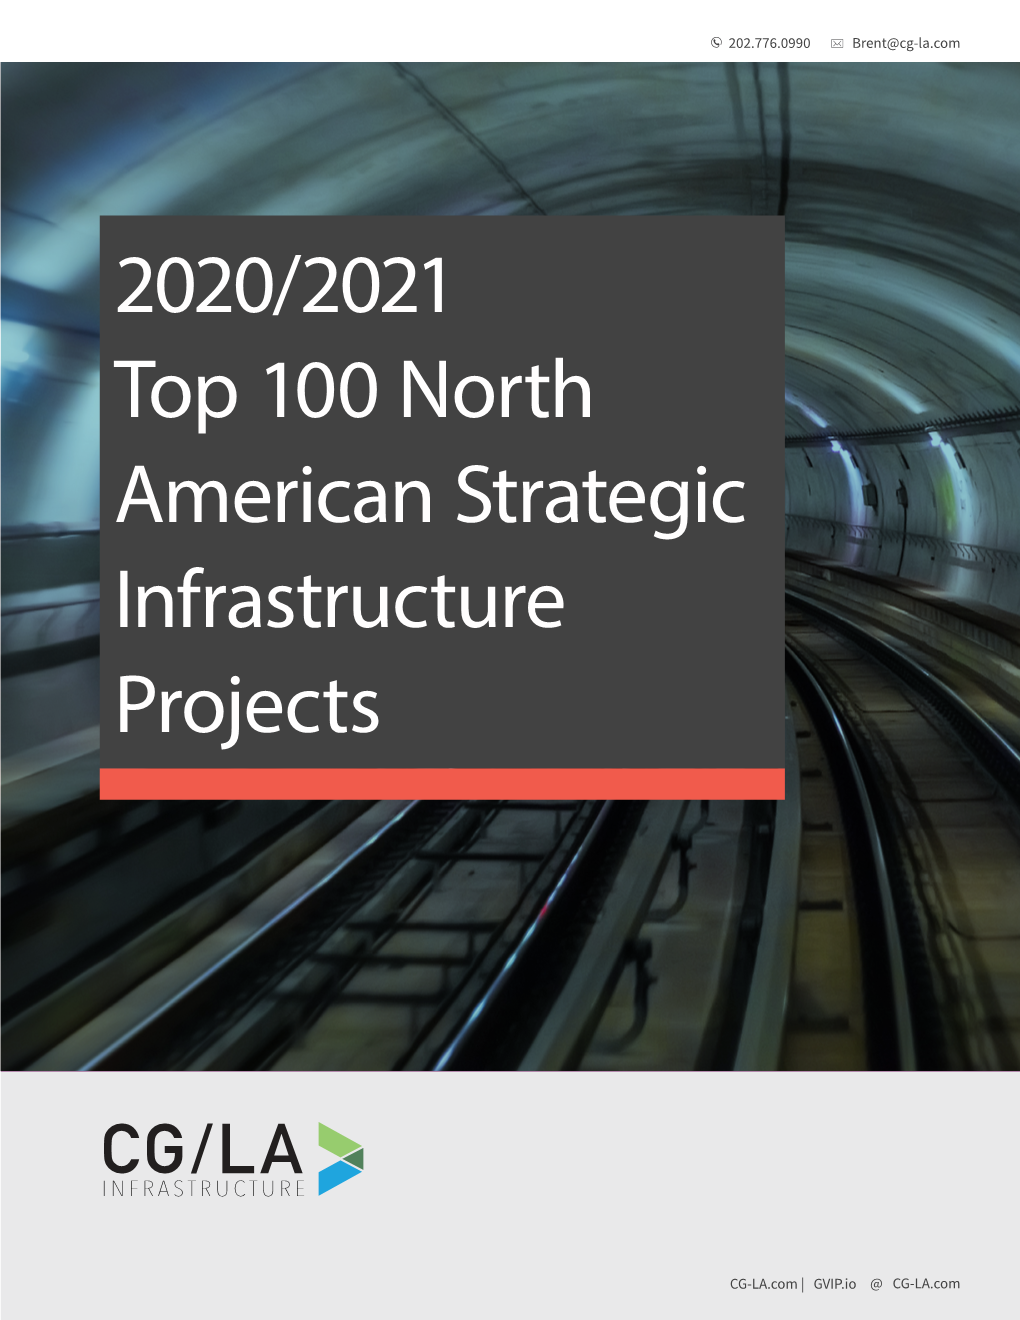 2020/2021 Top 100 North American Strategic Infrastructure Projects